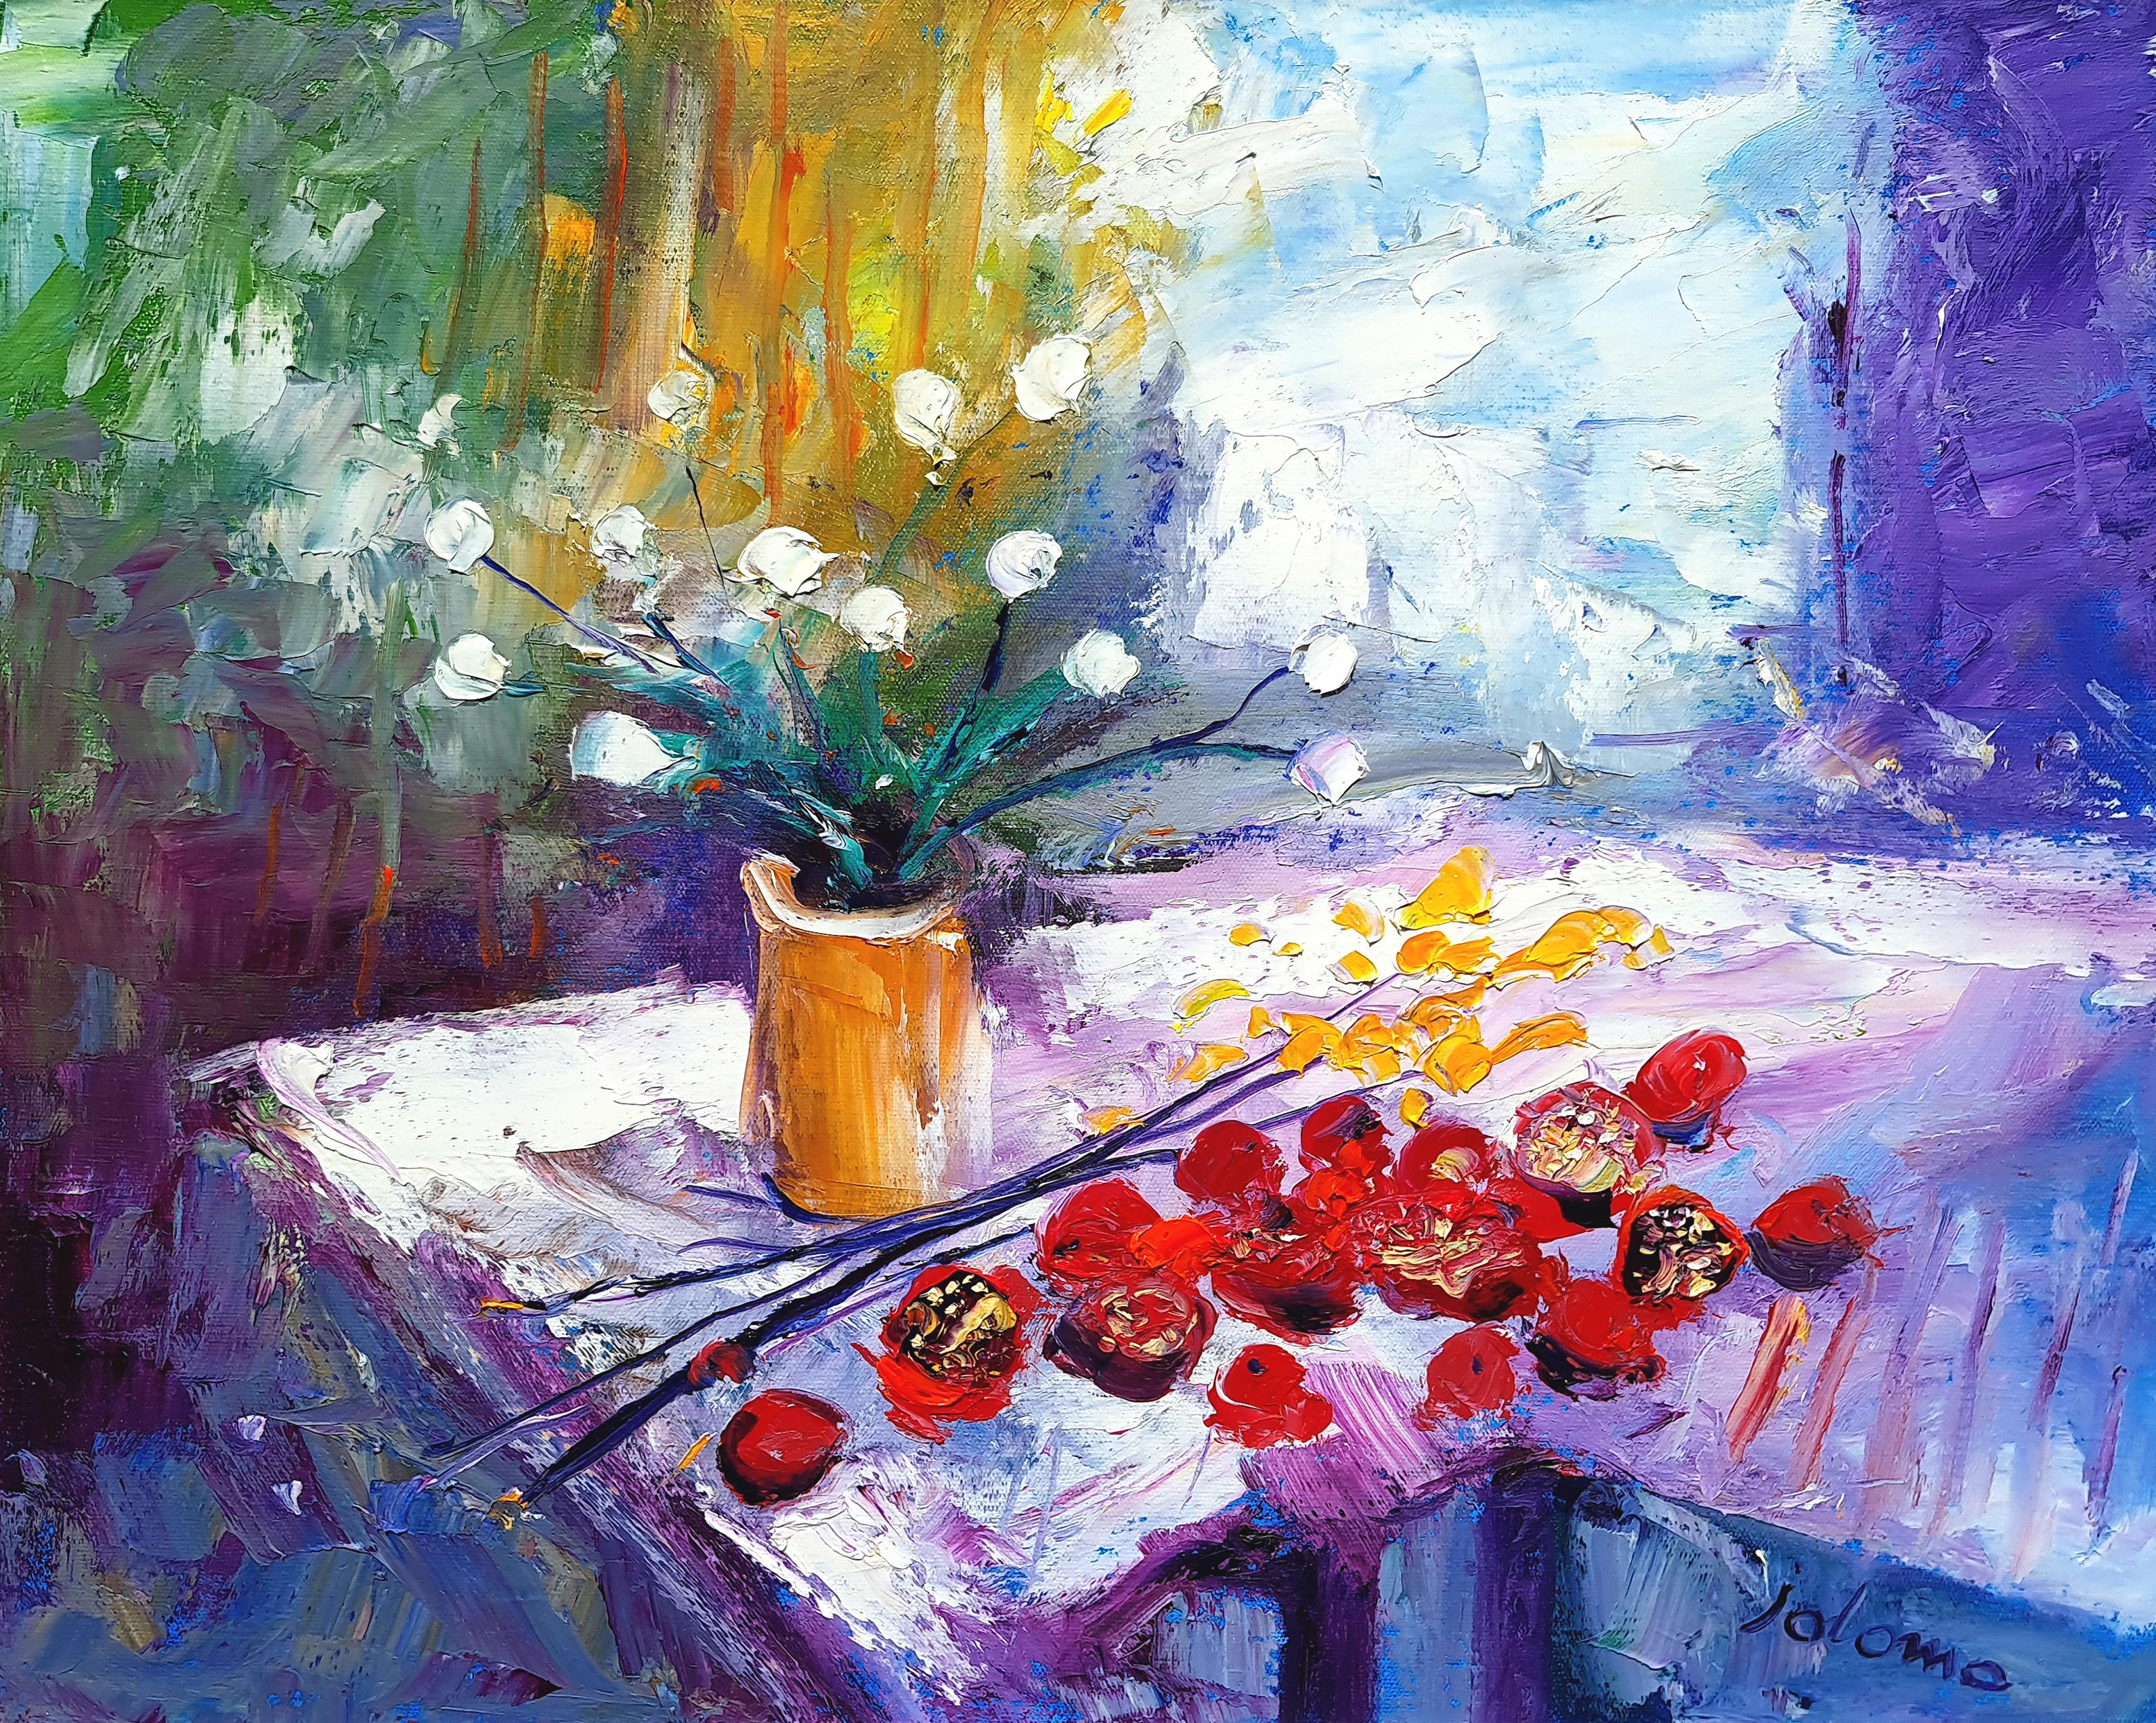 White Blooms and Pomegranates, 2021 - Painting by JOLOMO - John Lowrie Morrison OBE